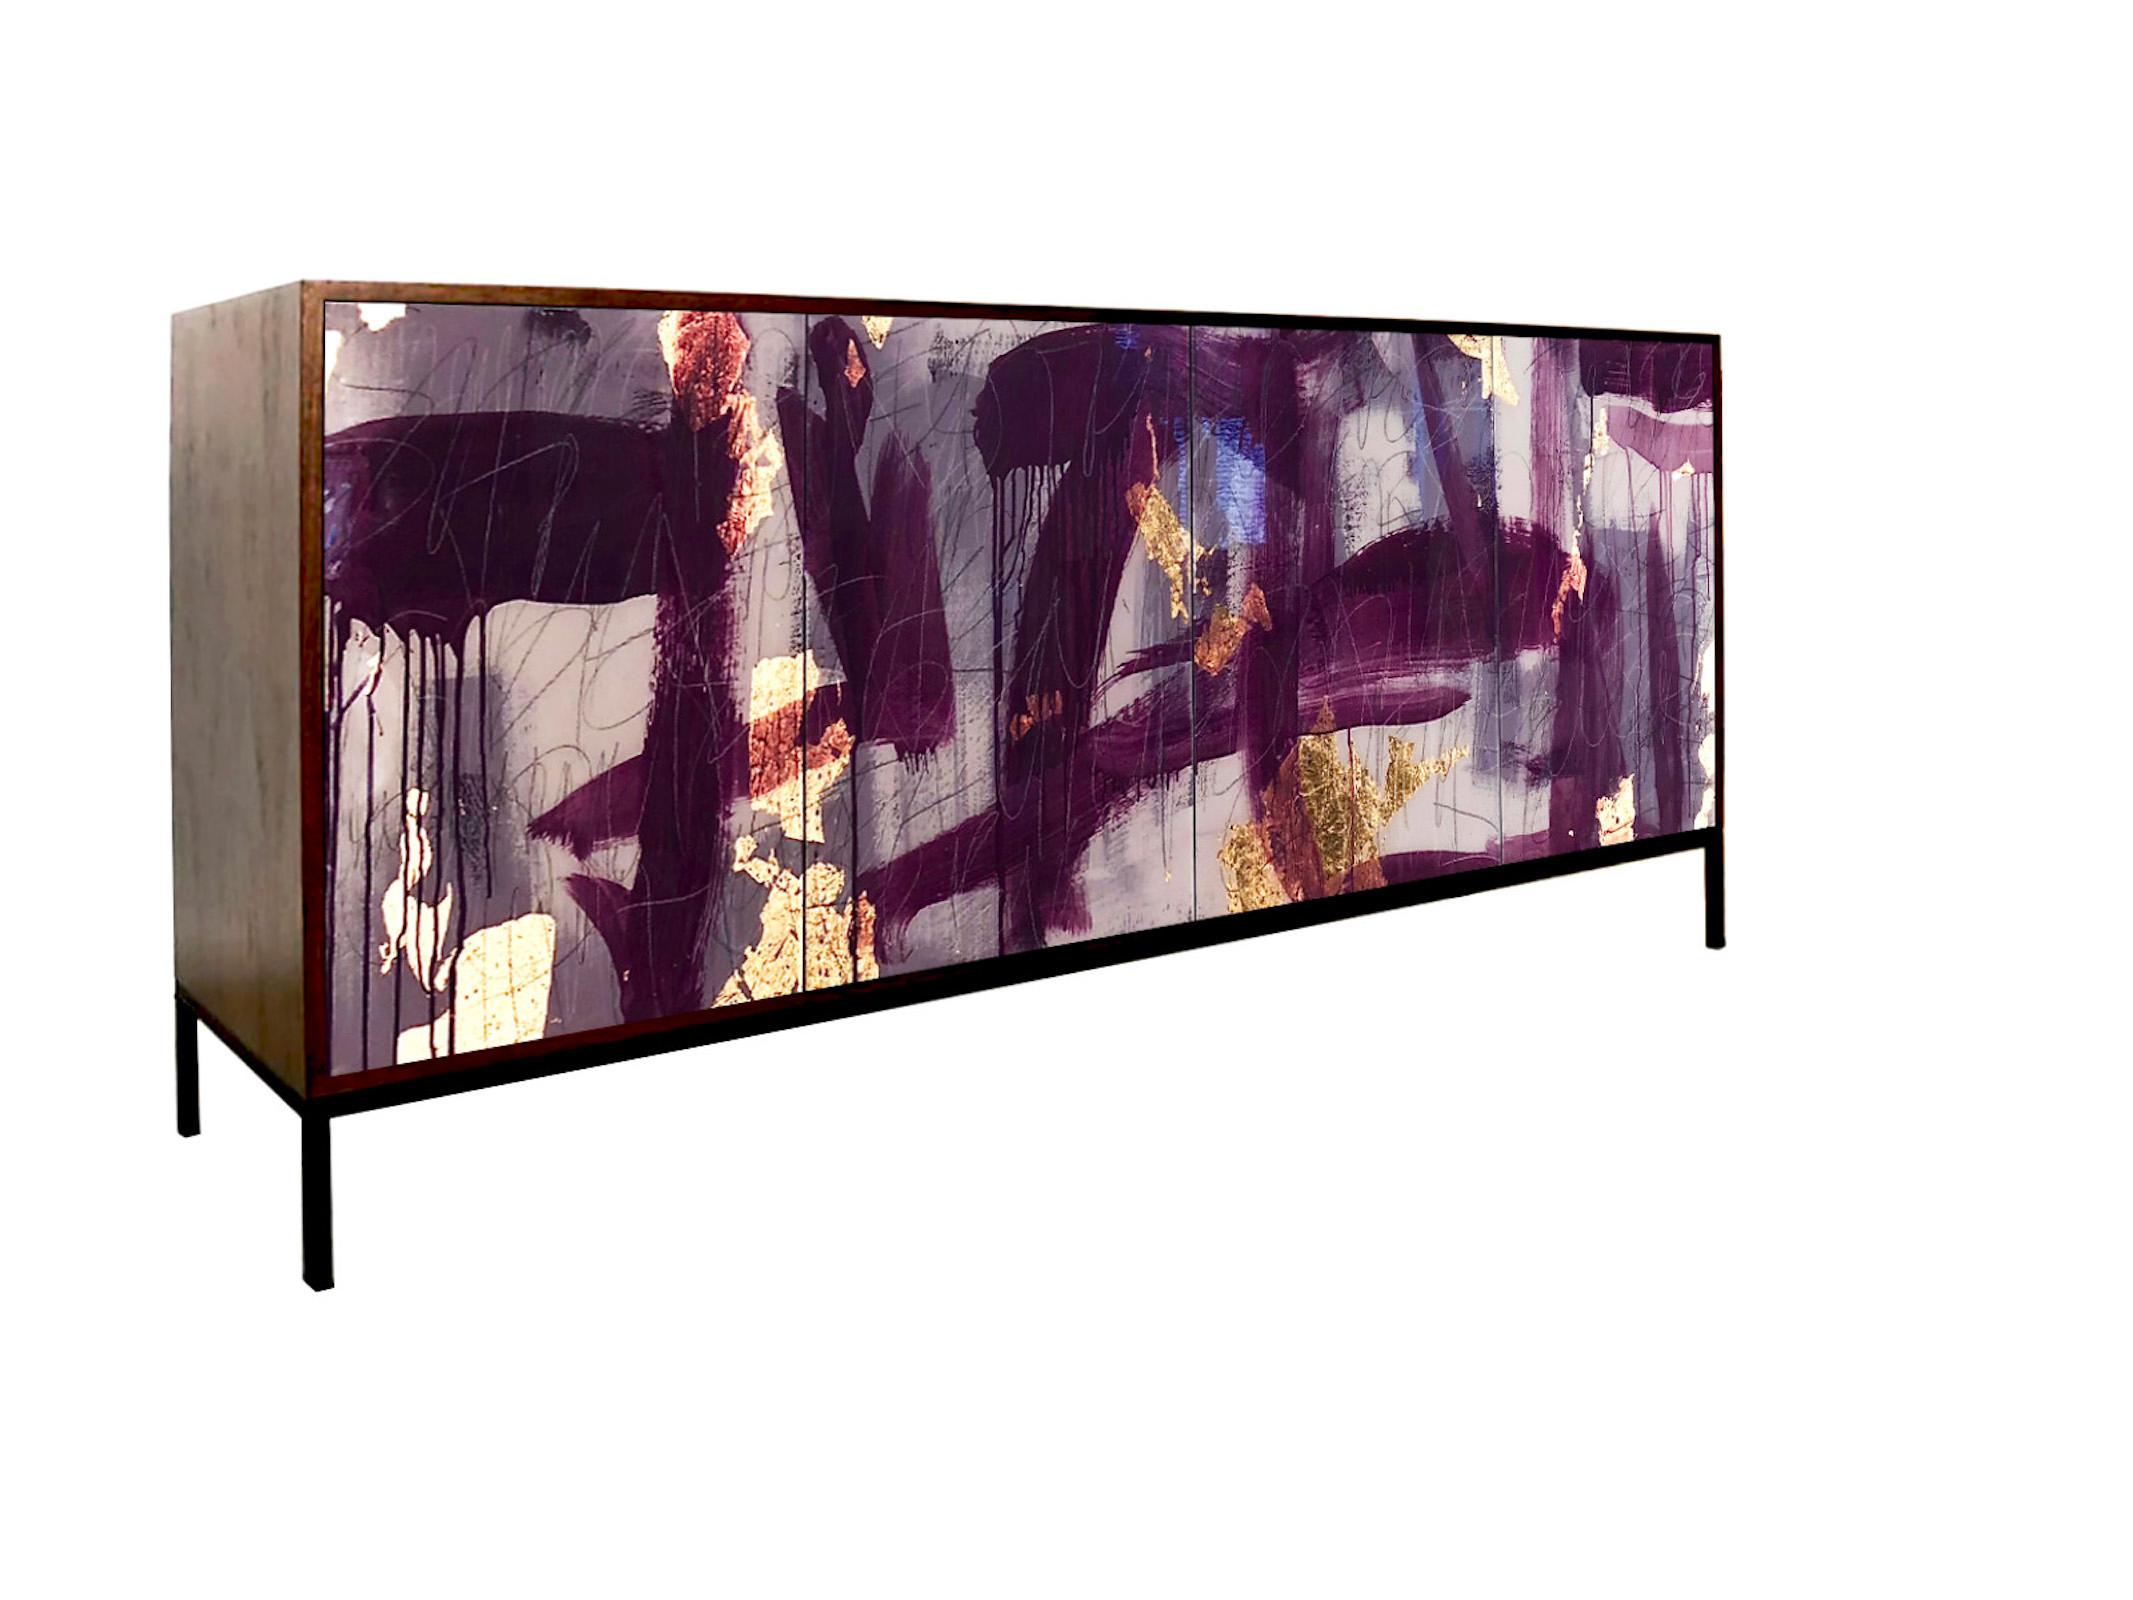 The Pratt Credenza is designed and finished by hand in our Toronto studio, Morgan Clayhall

The artwork is created by artist, Murray Duncan. Abstract in nature but contain movement with in the border of the dege of each doors.
The cabinet is one of